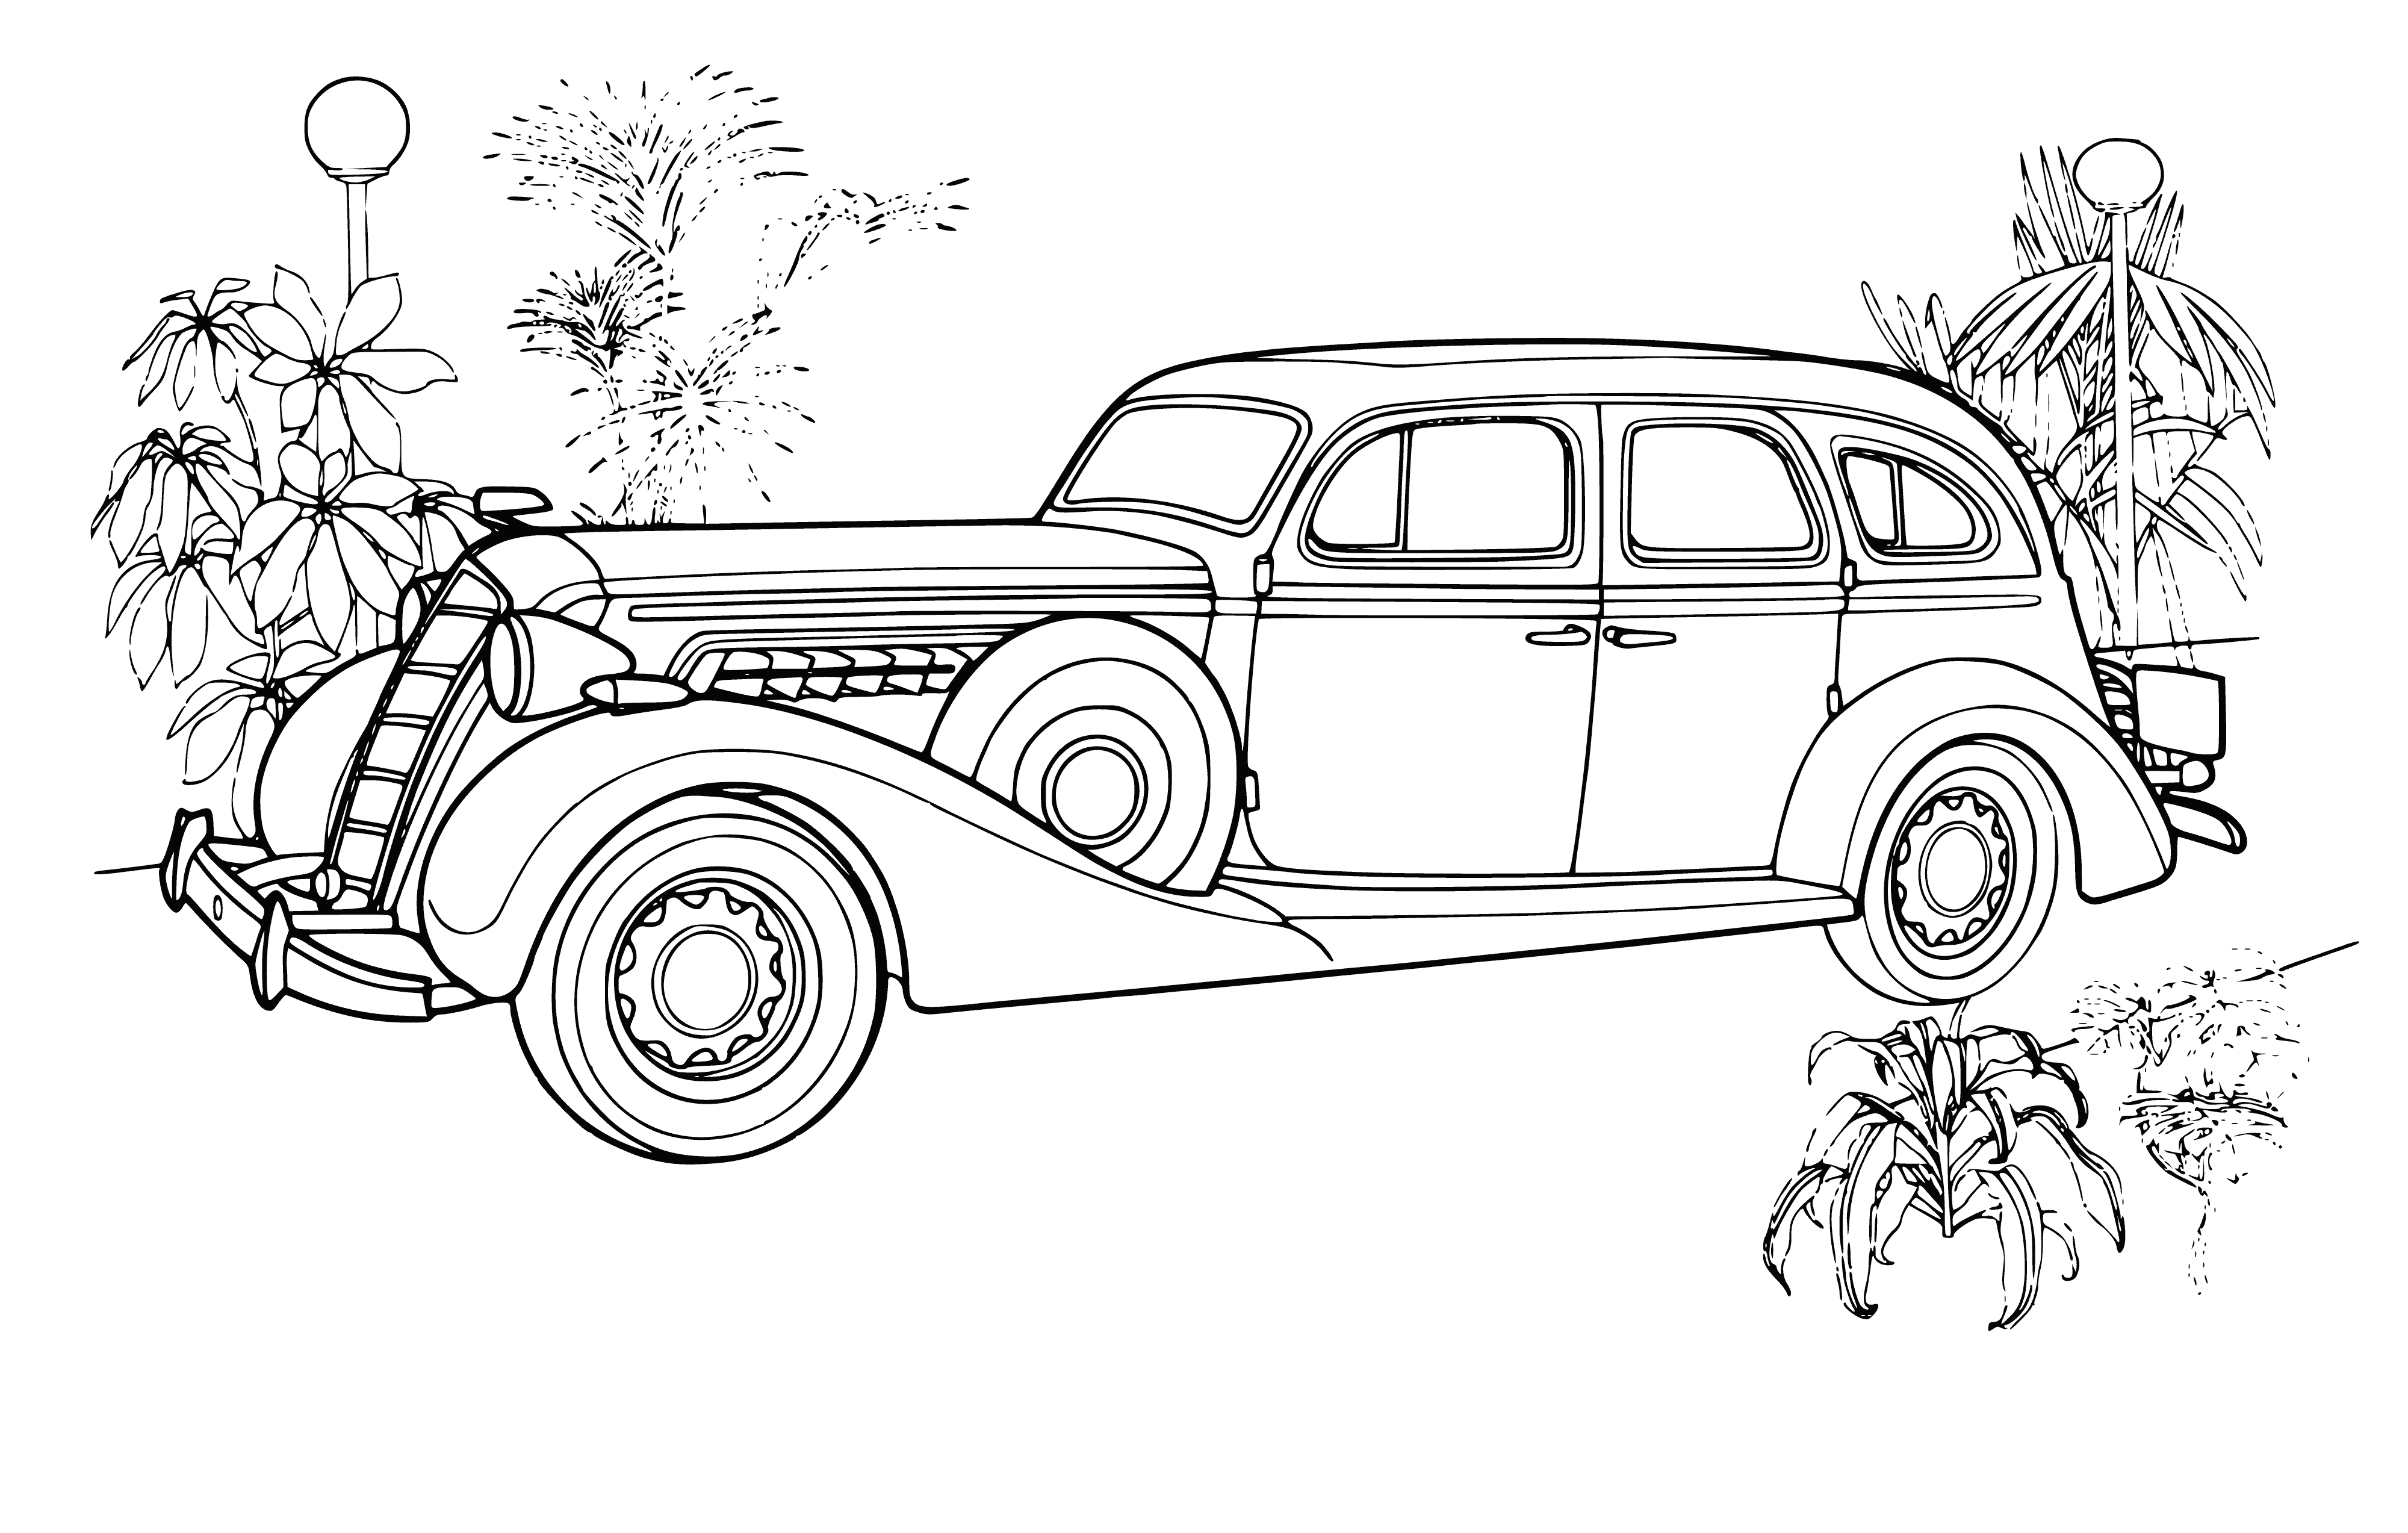 coloring page: Coloring page of 2 classic cars- ZIS-101, one in foreground w/headlights on, other in background w/driver in seat. Hoods both open.